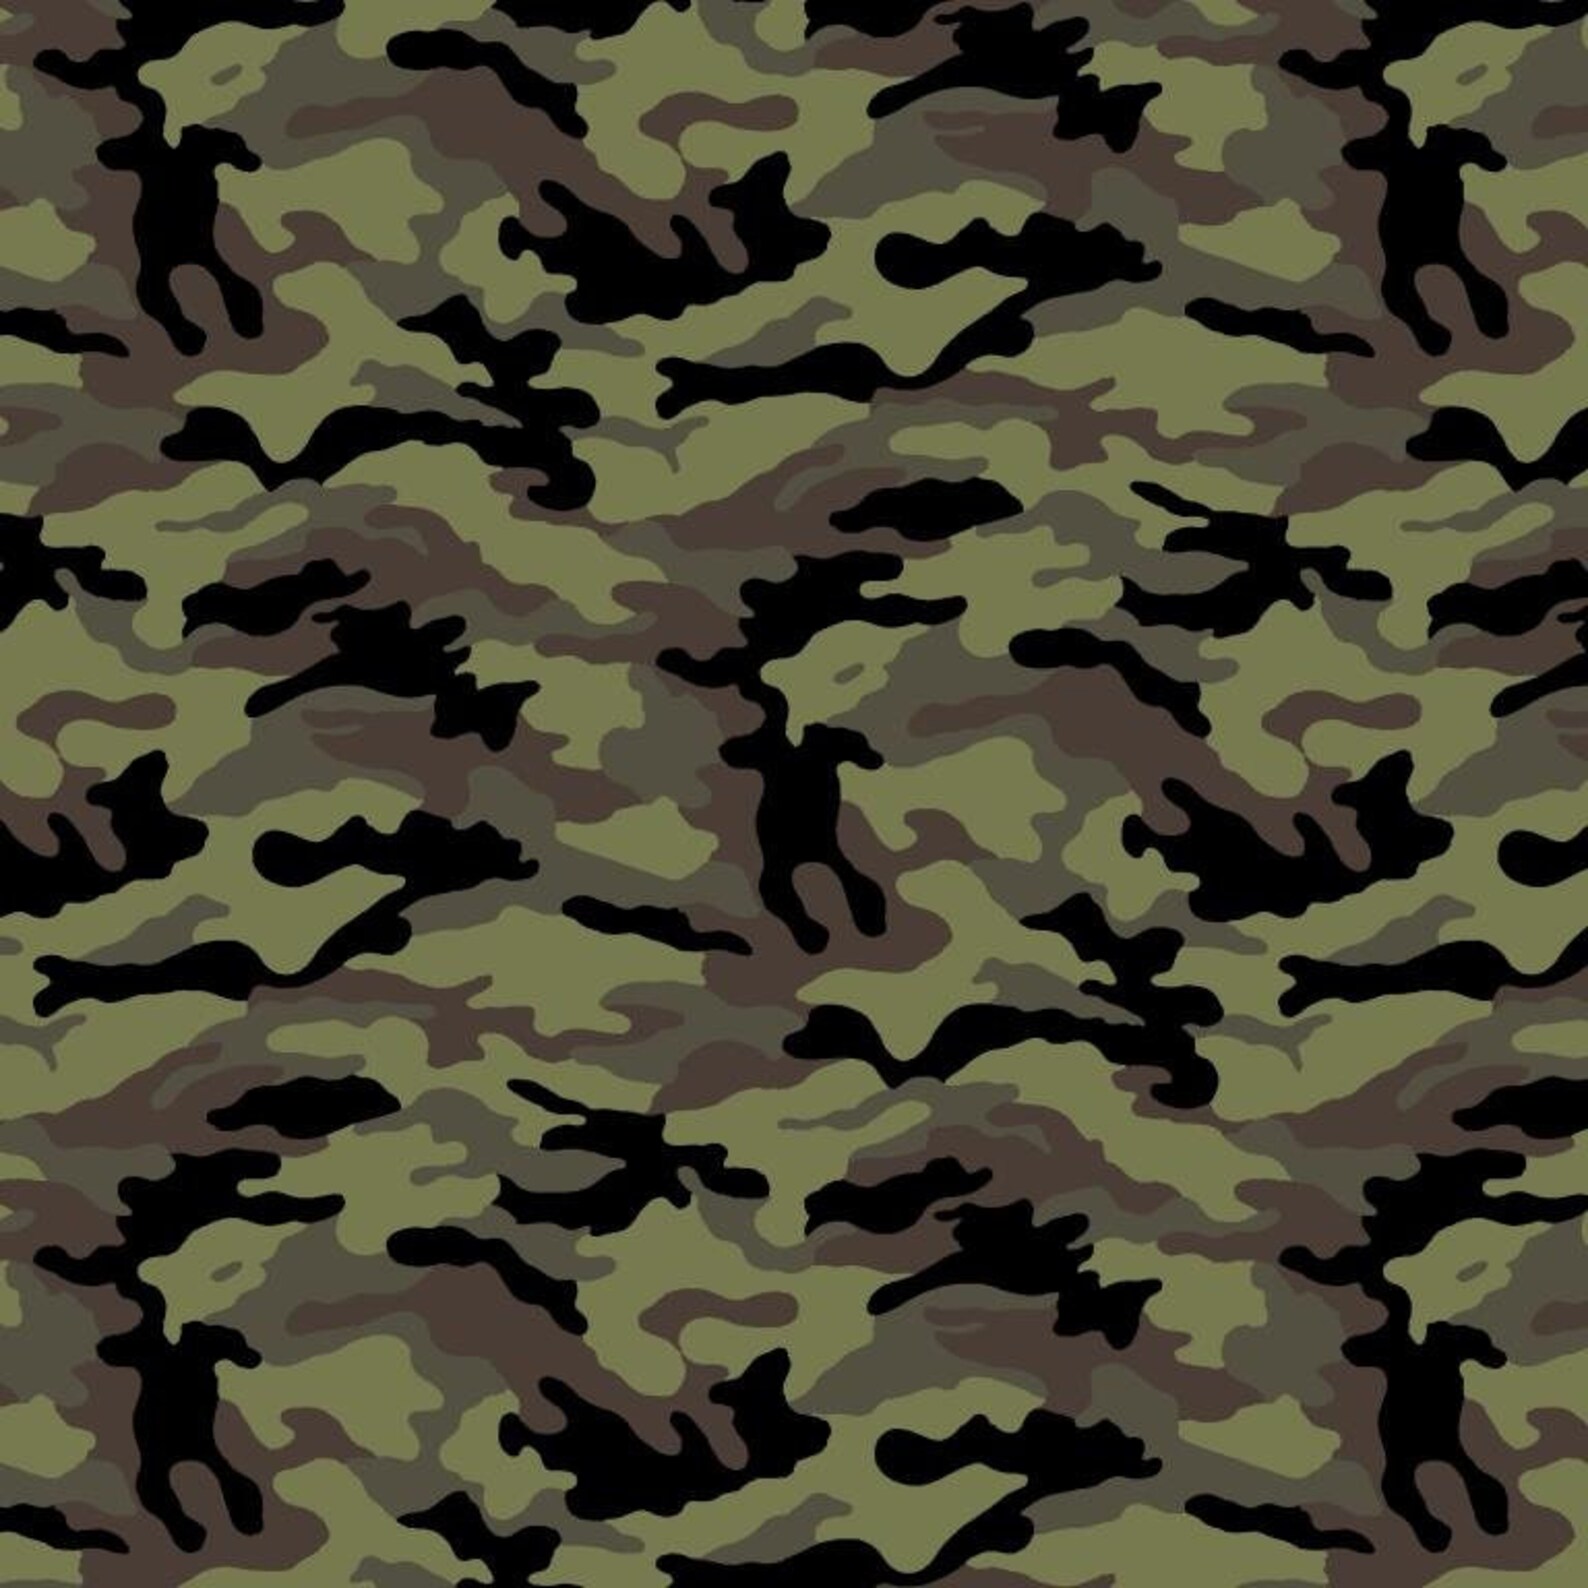 Camouflage Cotton Fabric by the Yard - Etsy